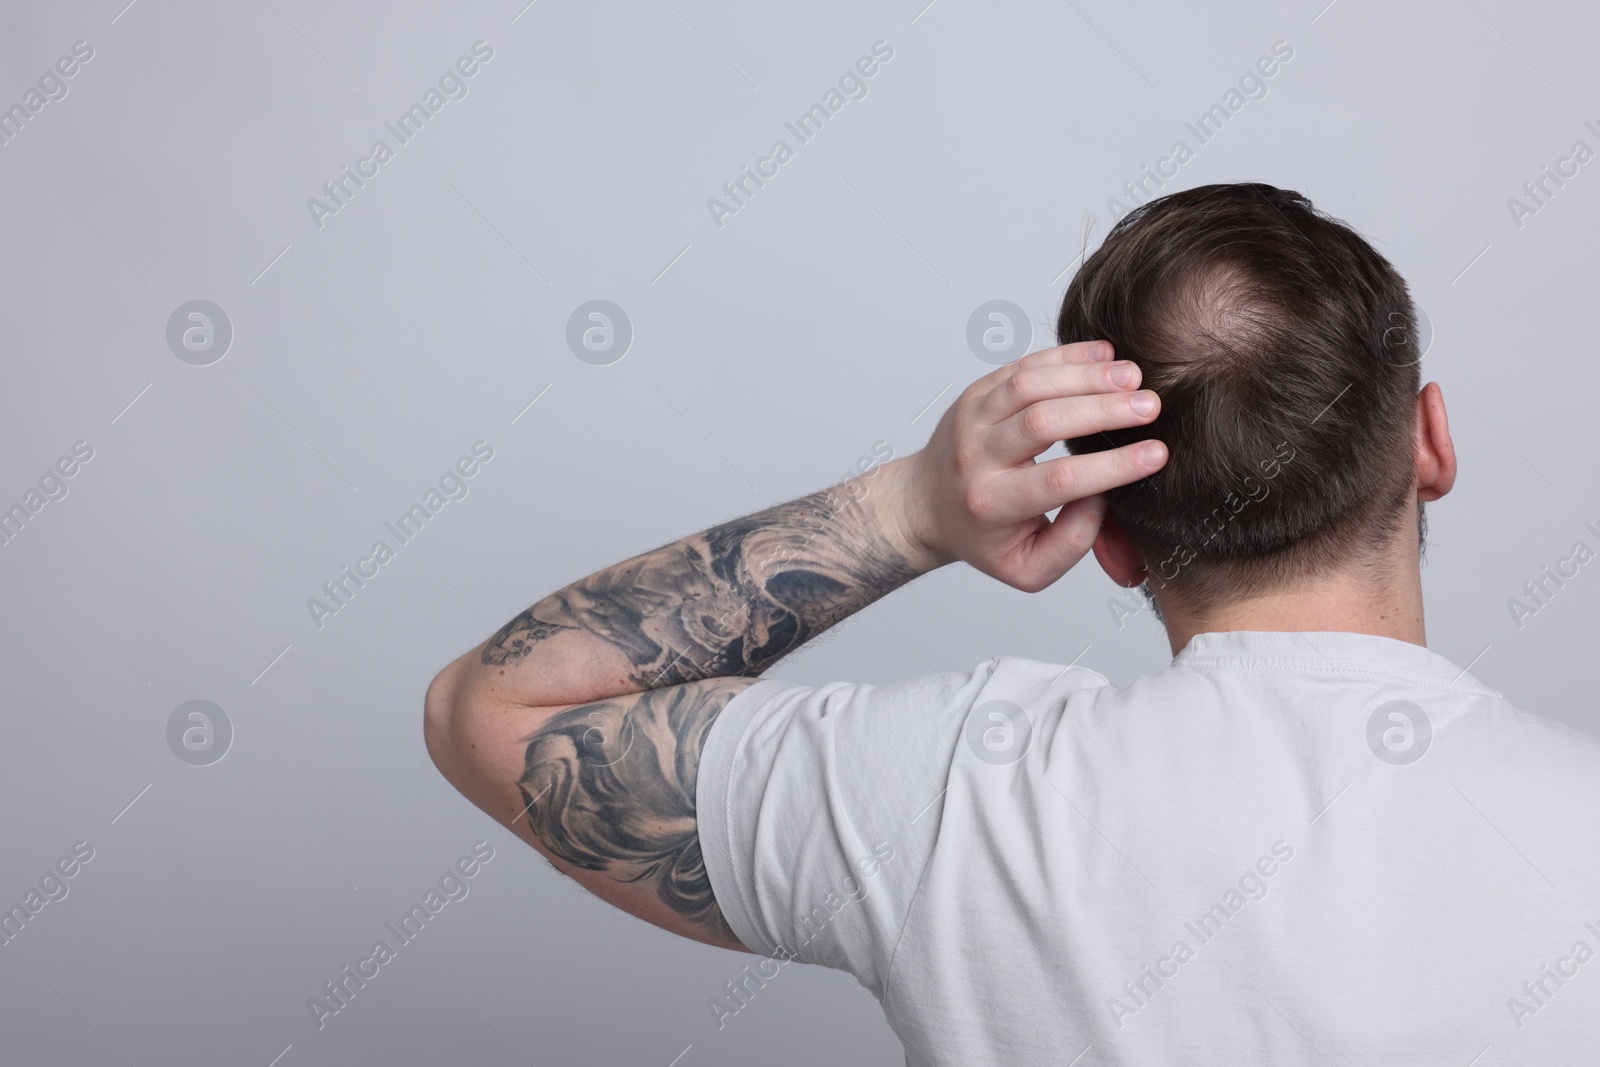 Photo of Baldness concept. Man with bald spot on light grey background, back view. Space for text